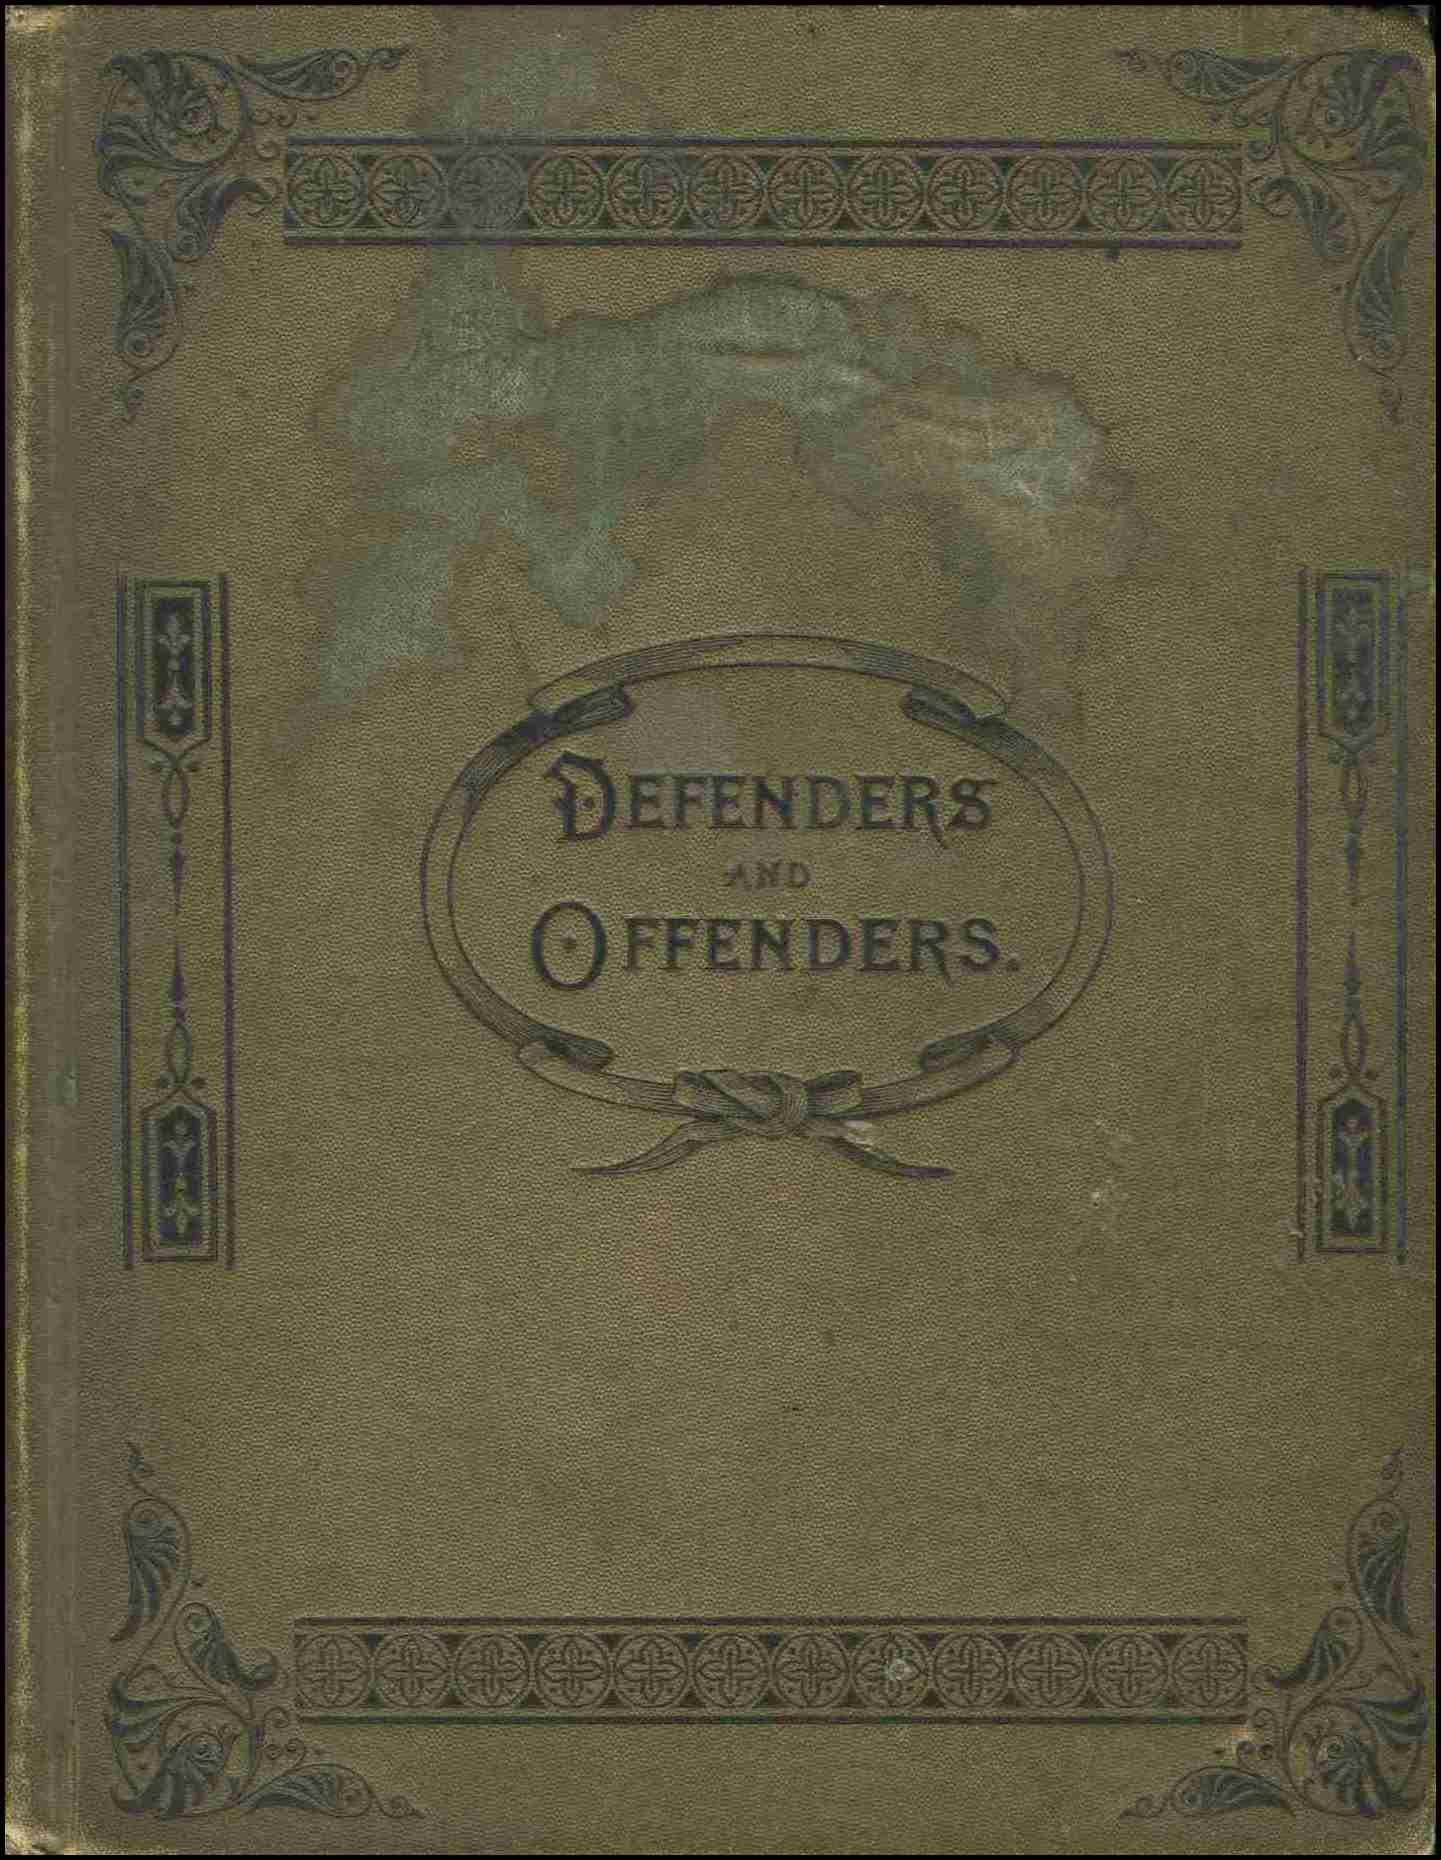 ALB A70 Buchner Tobacco Offenders and Defenders.jpg